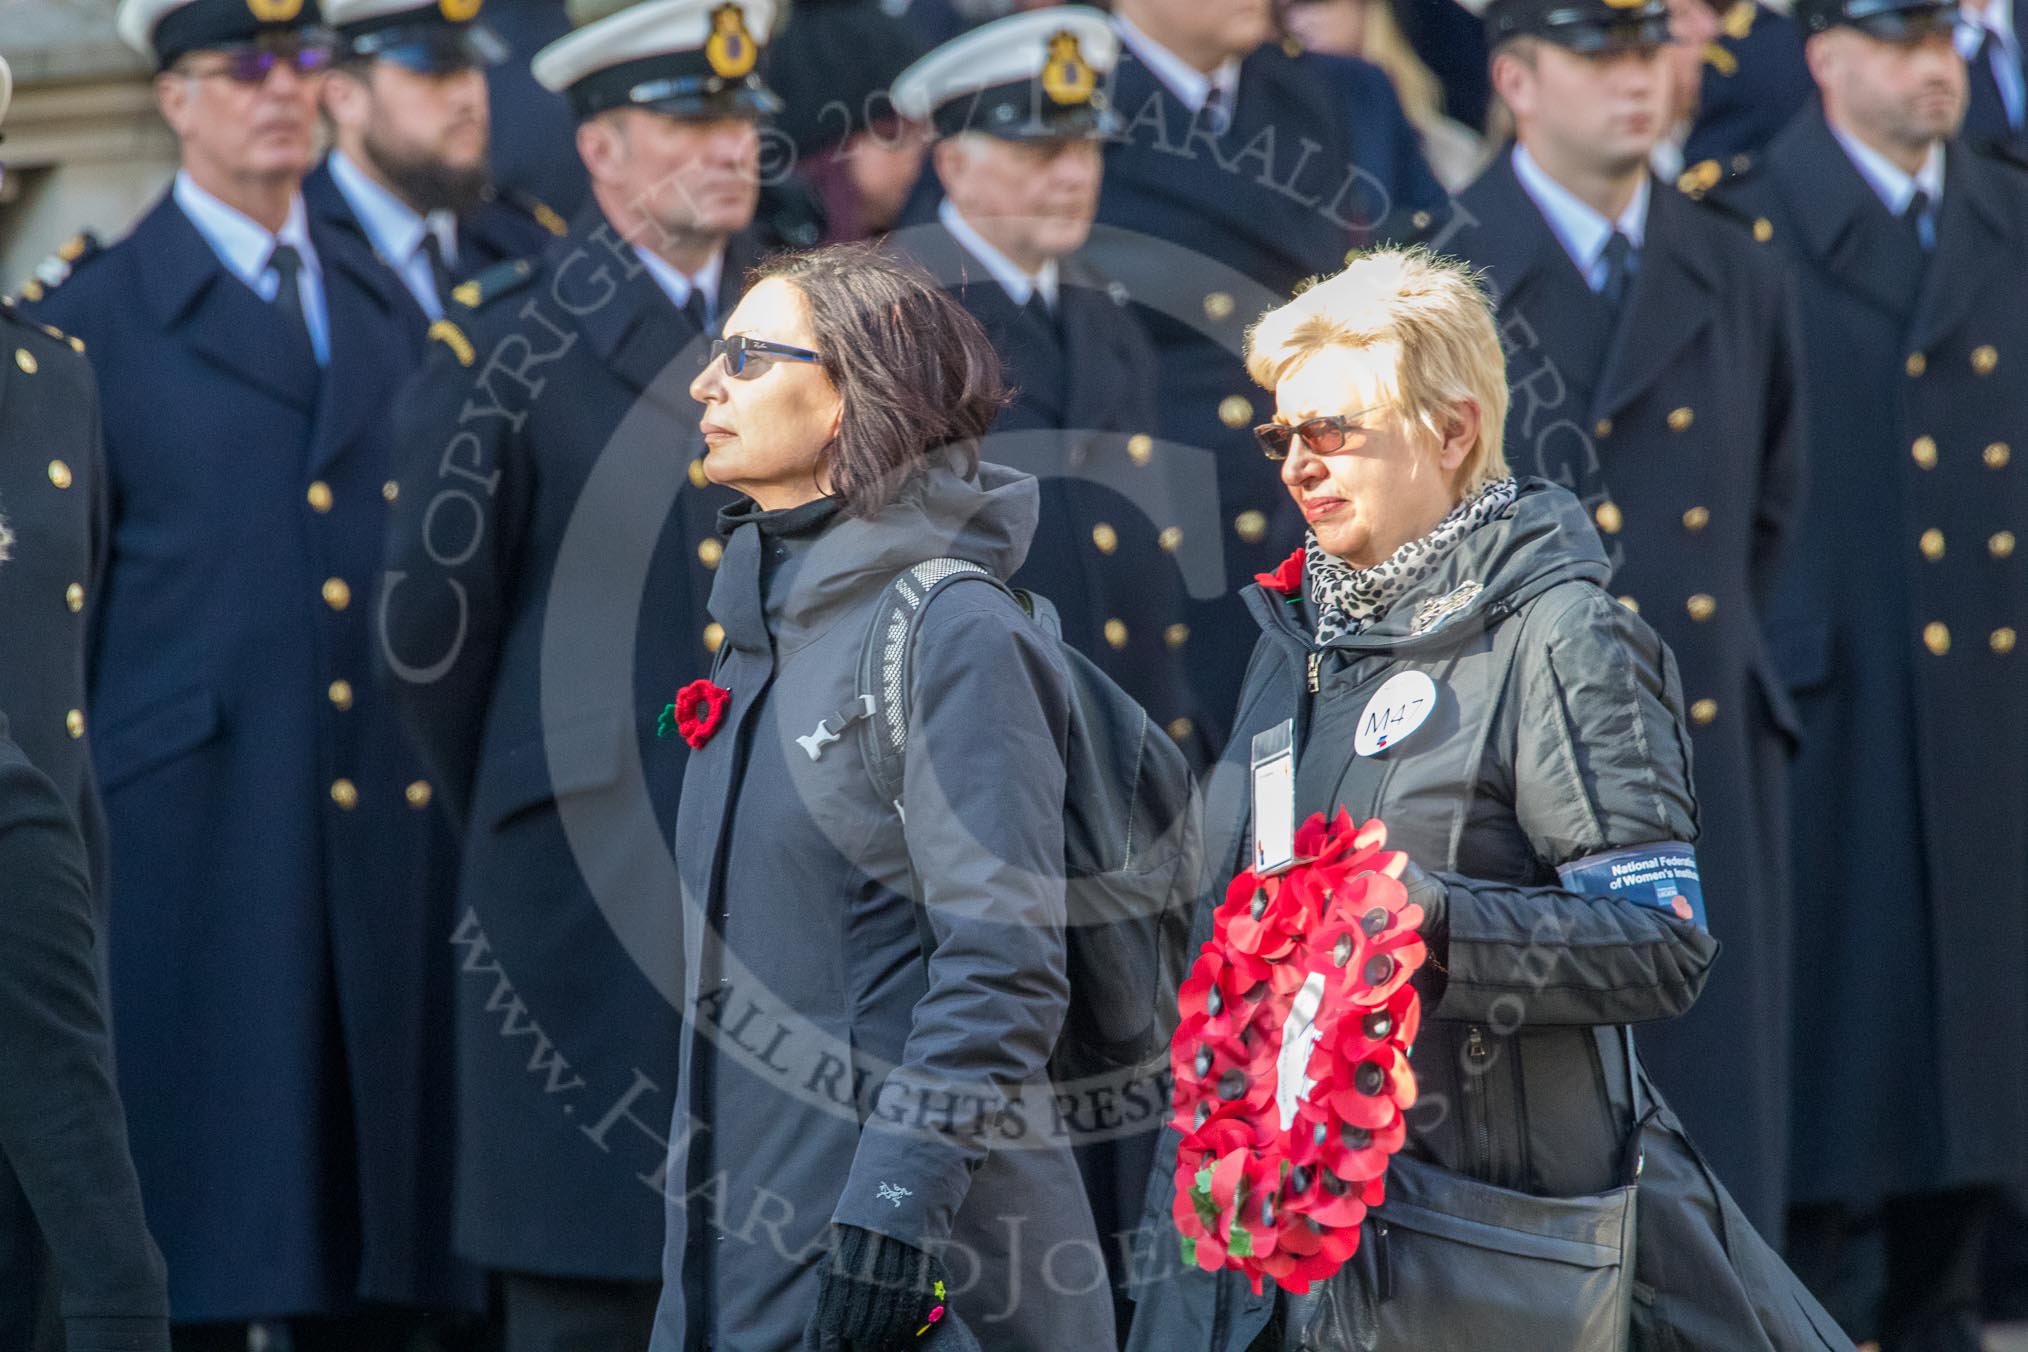 The NFWI - National Federation of Women's Institutes (Group M47, 4 members) during the Royal British Legion March Past on Remembrance Sunday at the Cenotaph, Whitehall, Westminster, London, 11 November 2018, 12:31.